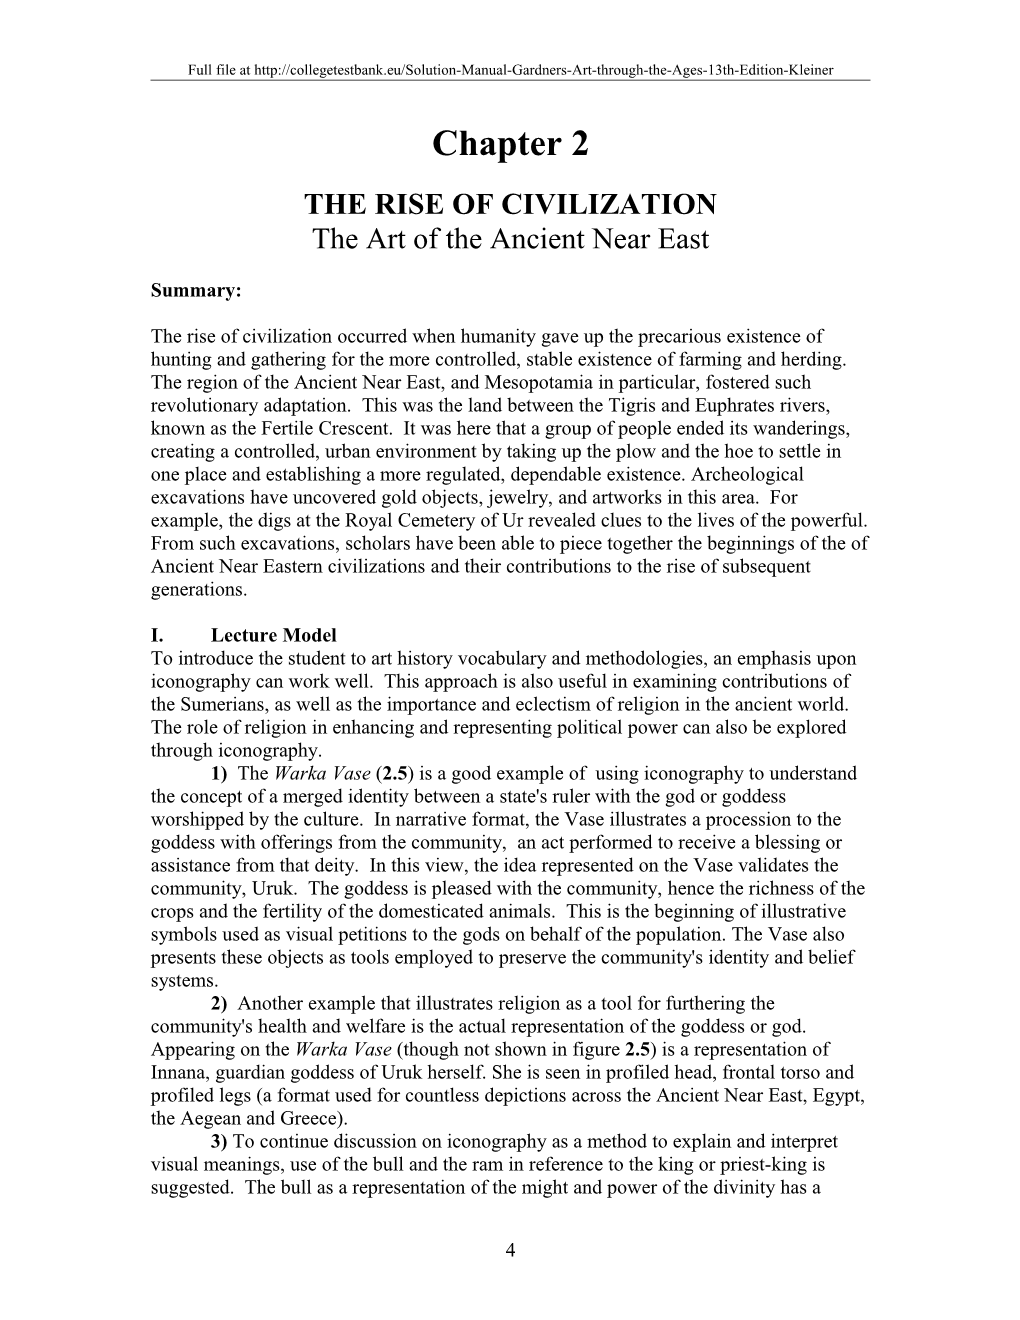 Chapter 2 the Rise of Civilization: the Art of the Ancient Near East